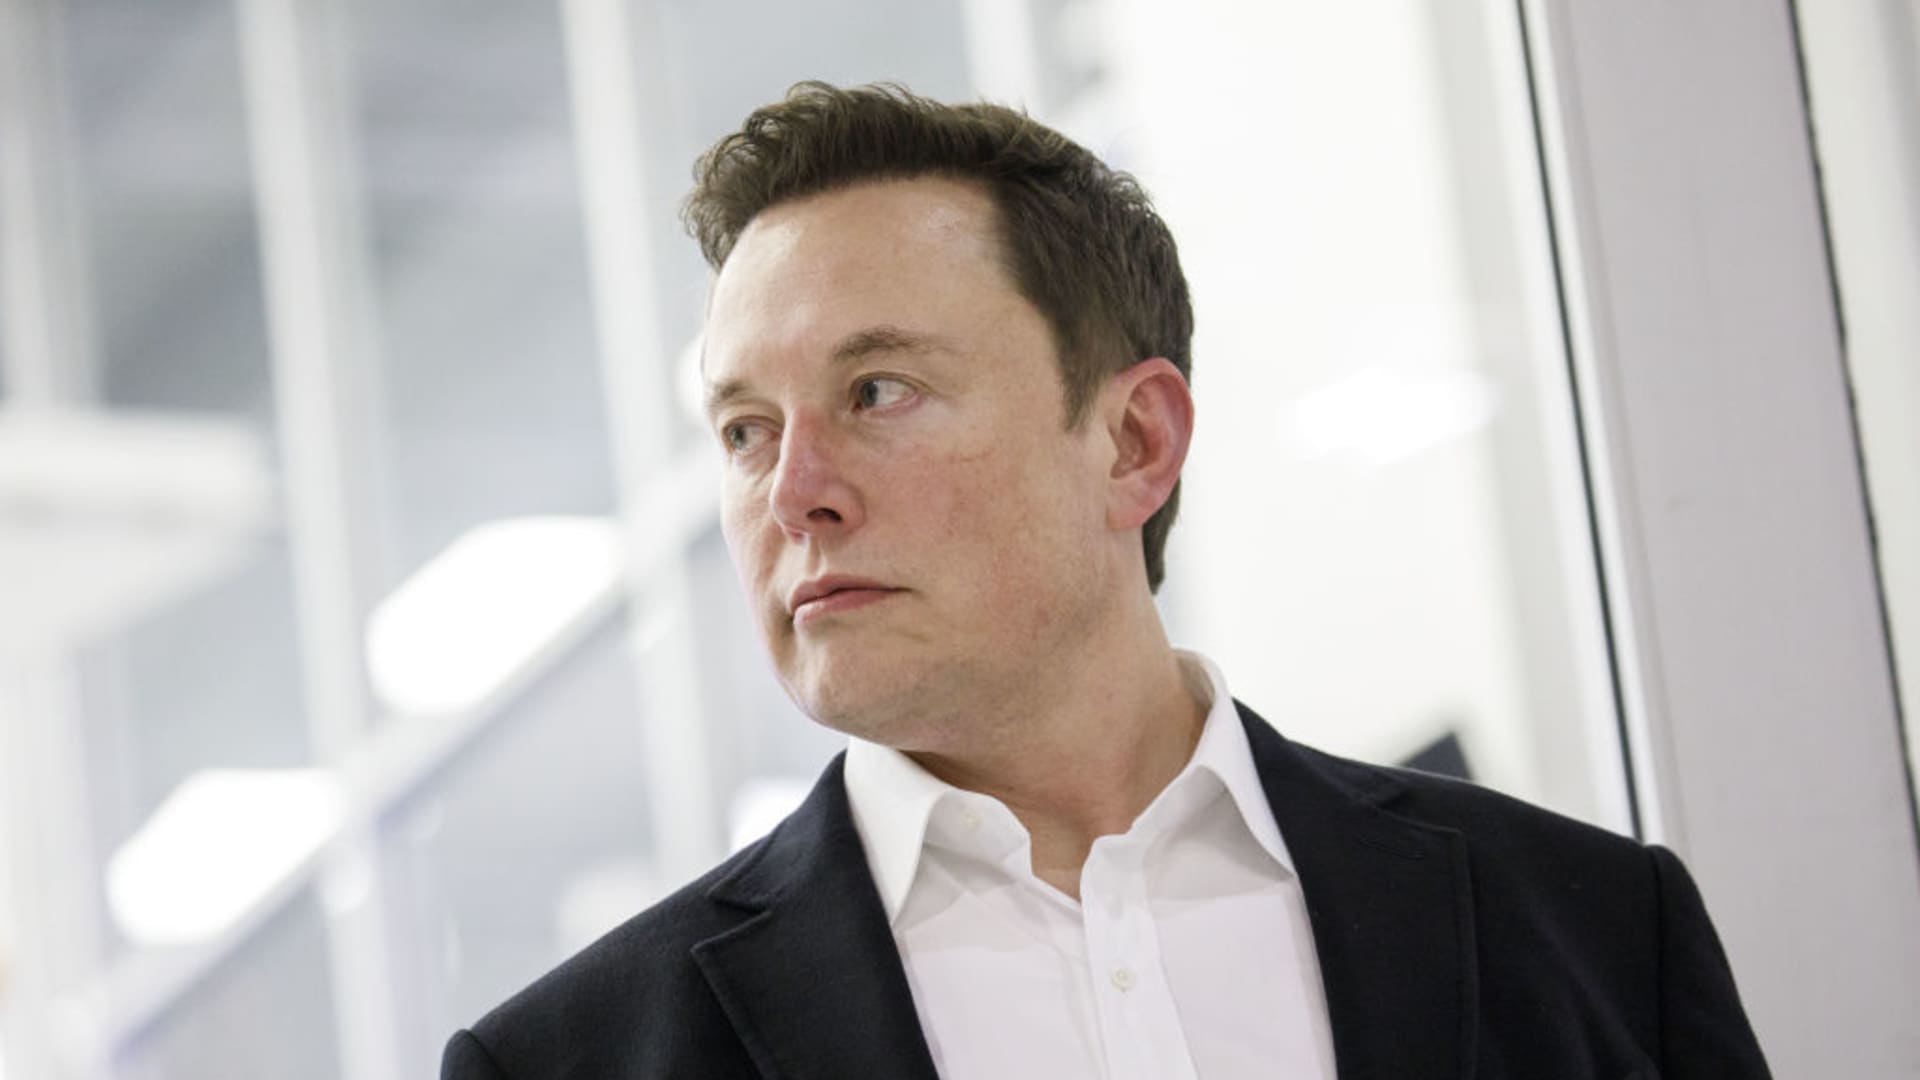 Elon Musk, during an event at SpaceX headquarters in Hawthorne, California, U.S., on Thursday, Oct. 10, 2019.